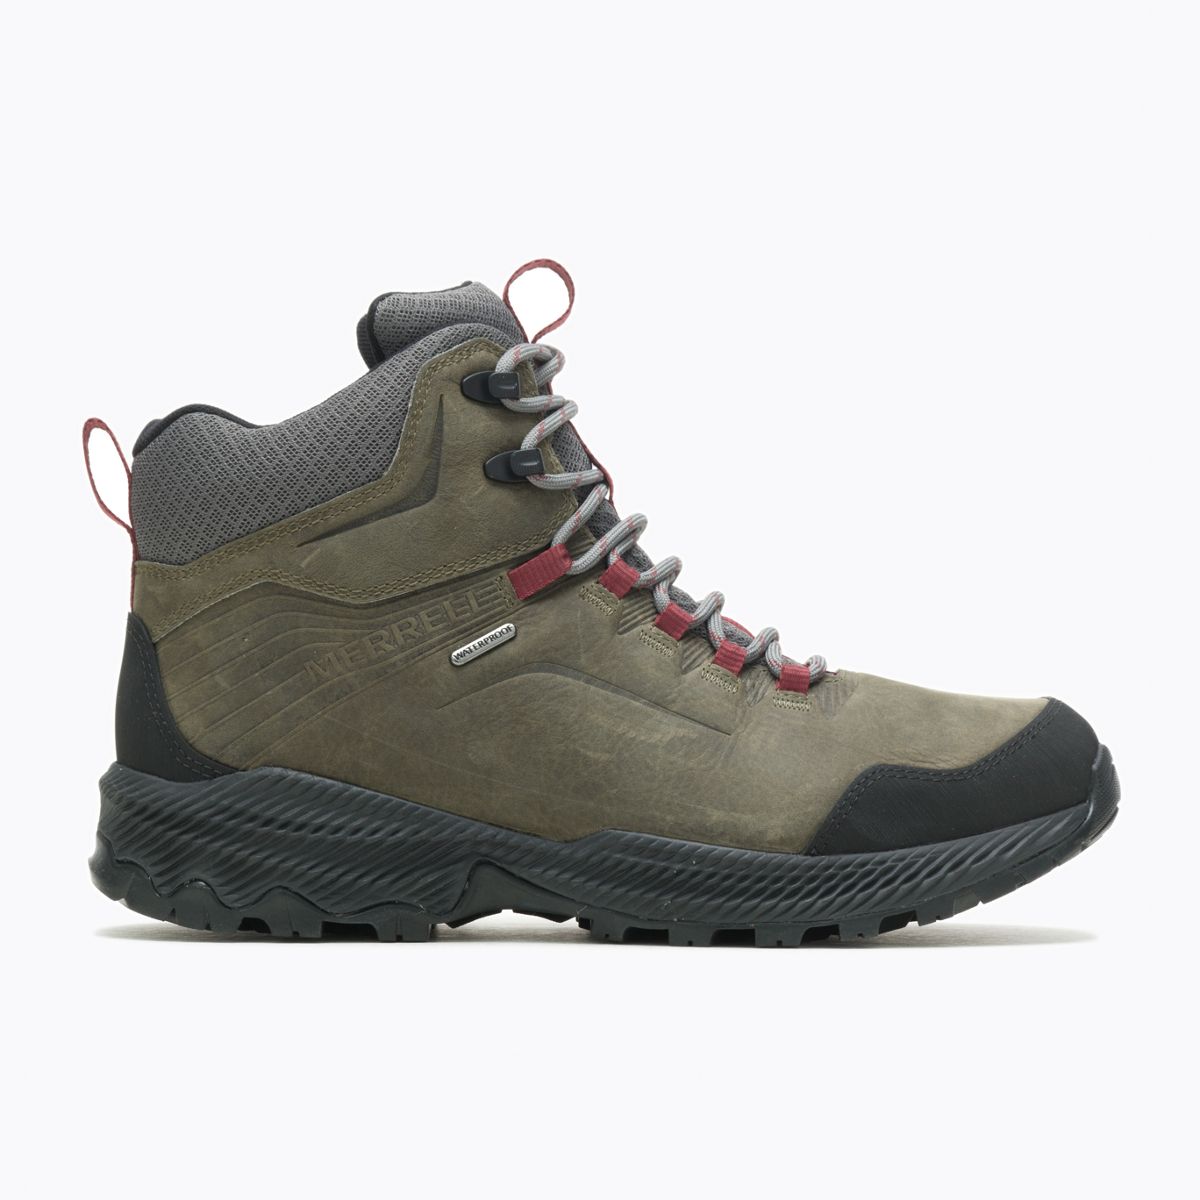 Men's Forestbound Mid Waterproof Hiking Boots